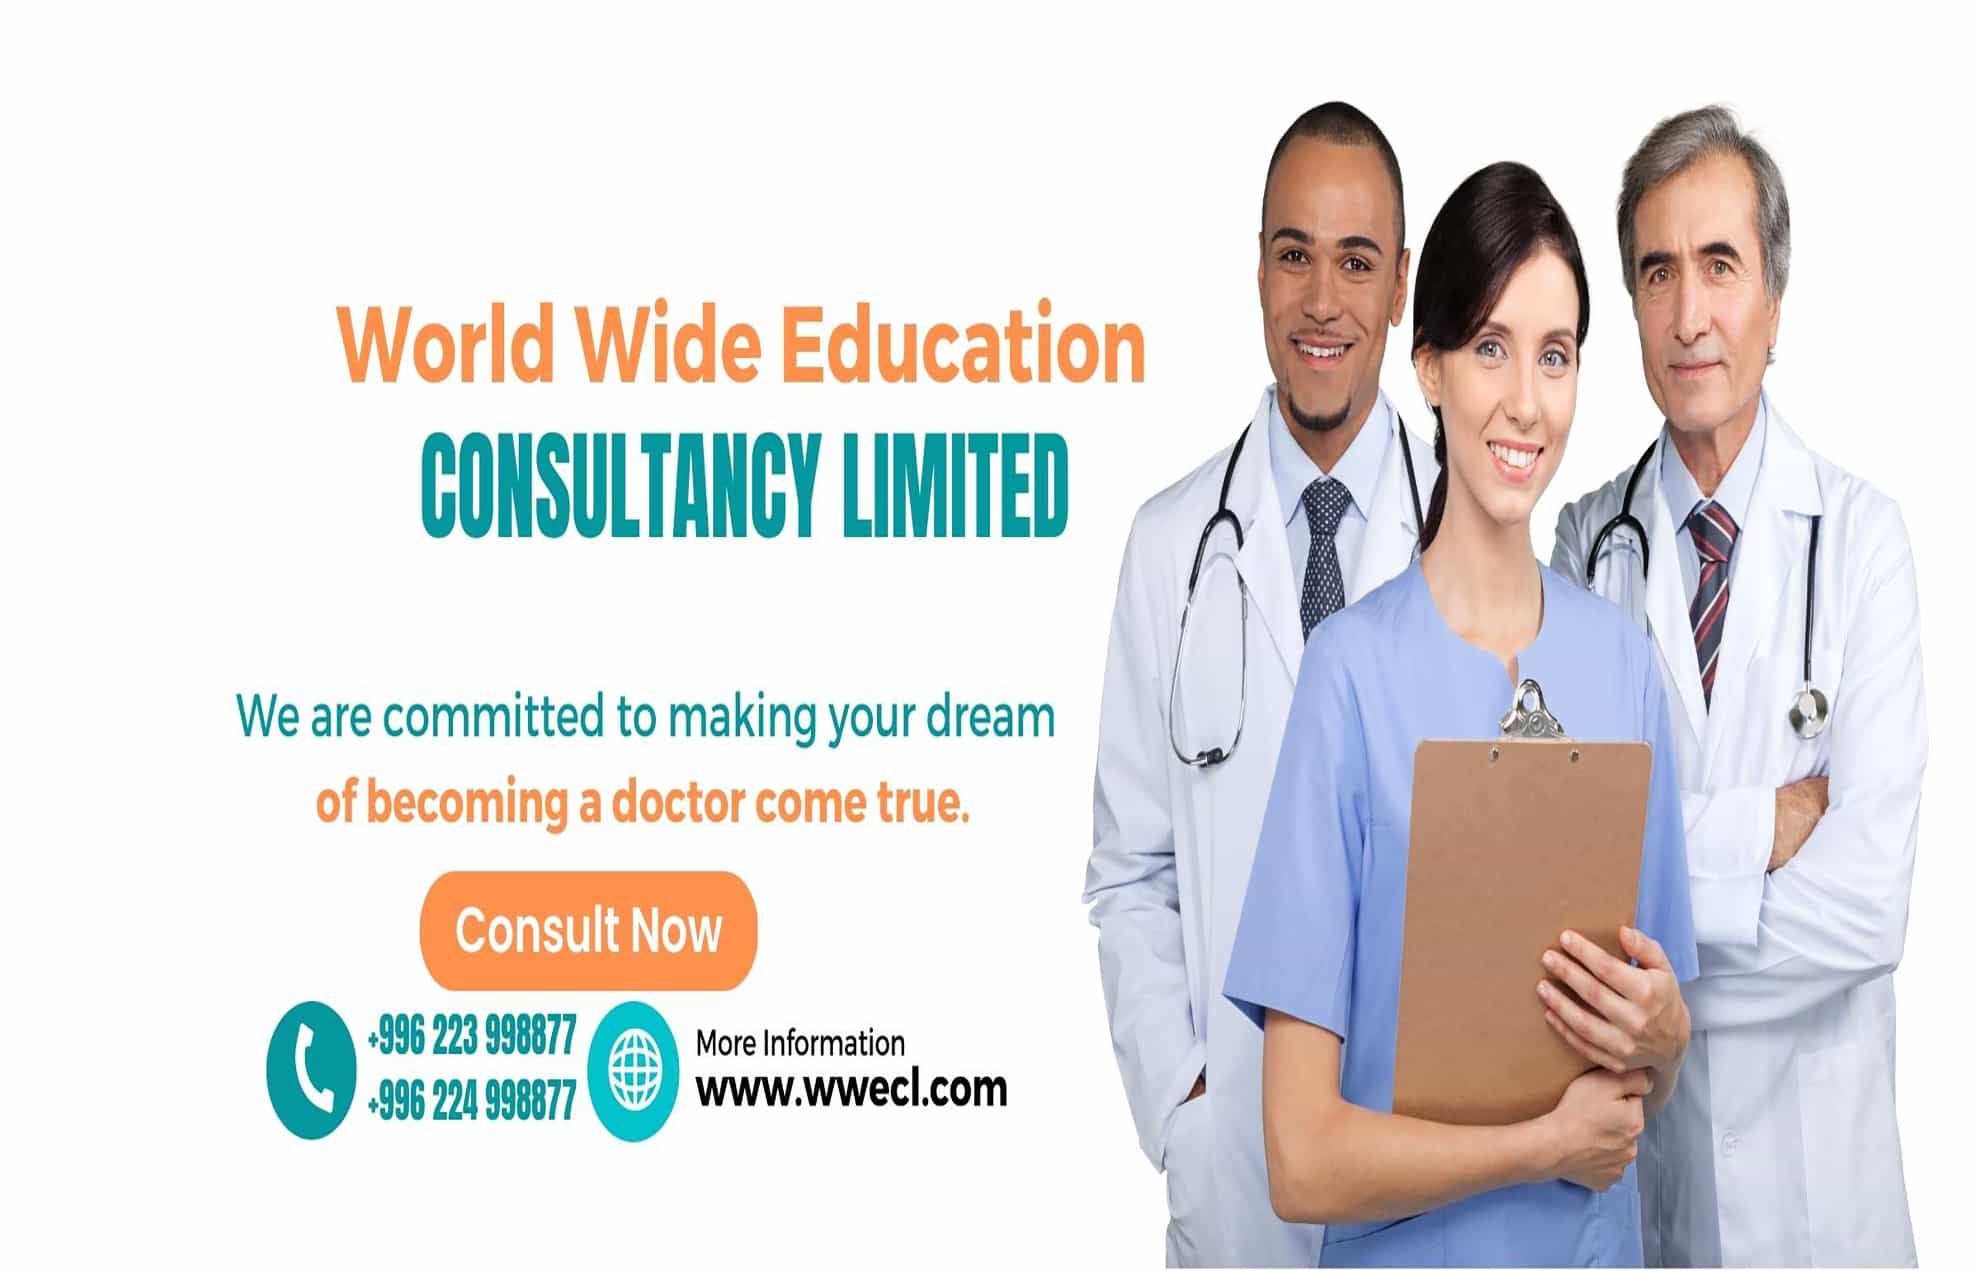 Mbbs in Kyrgyzstan; Mbbs in china; Mbbs in Ukraine; Mbbs in Russia; Mbbs abroad; Study abroad; Study medicine